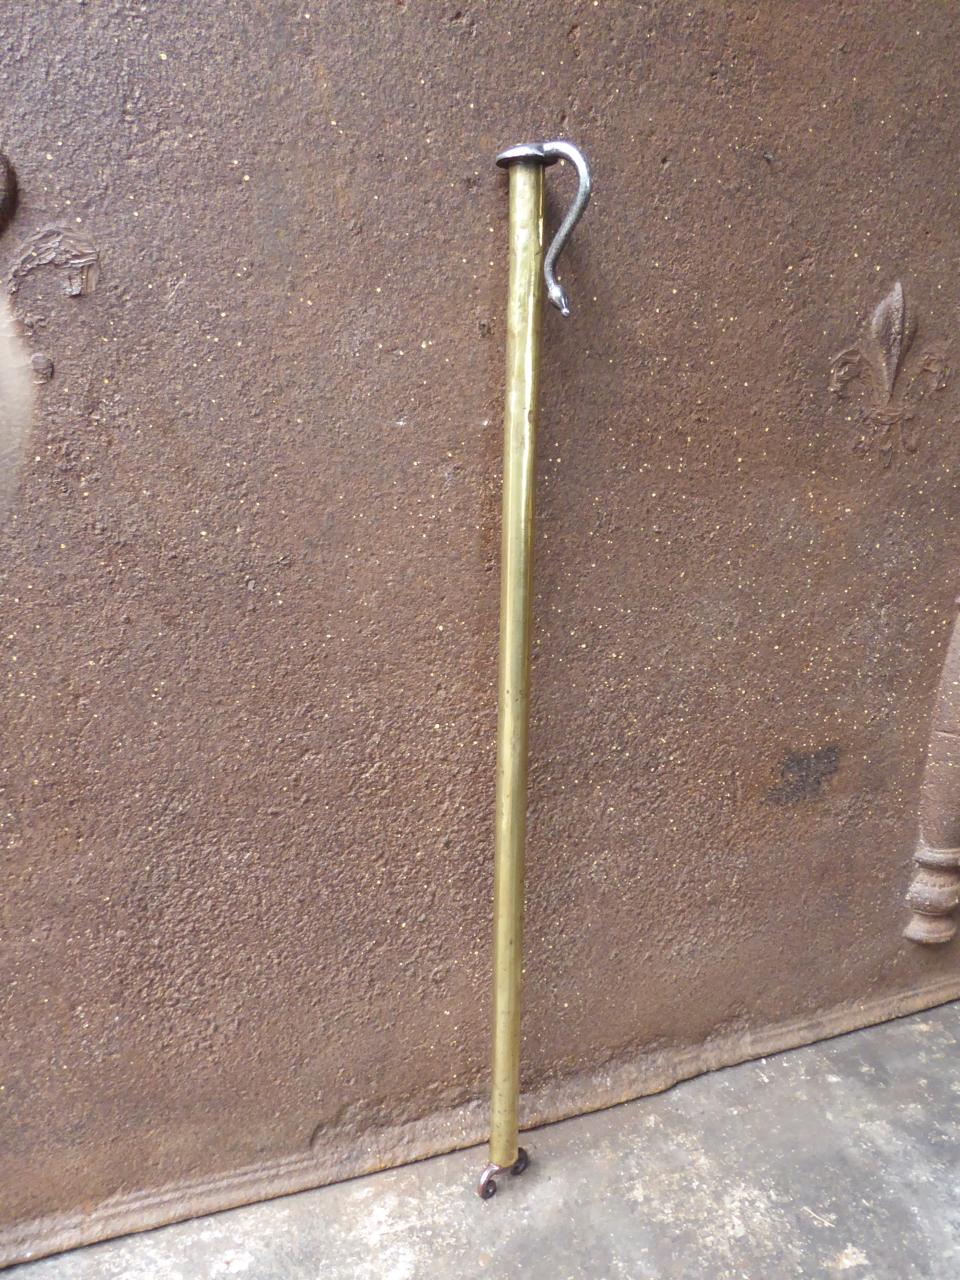 18th century Dutch Louis XV blow poker. The blow poke is made of brass and wrought iron. It is in a good working condition.